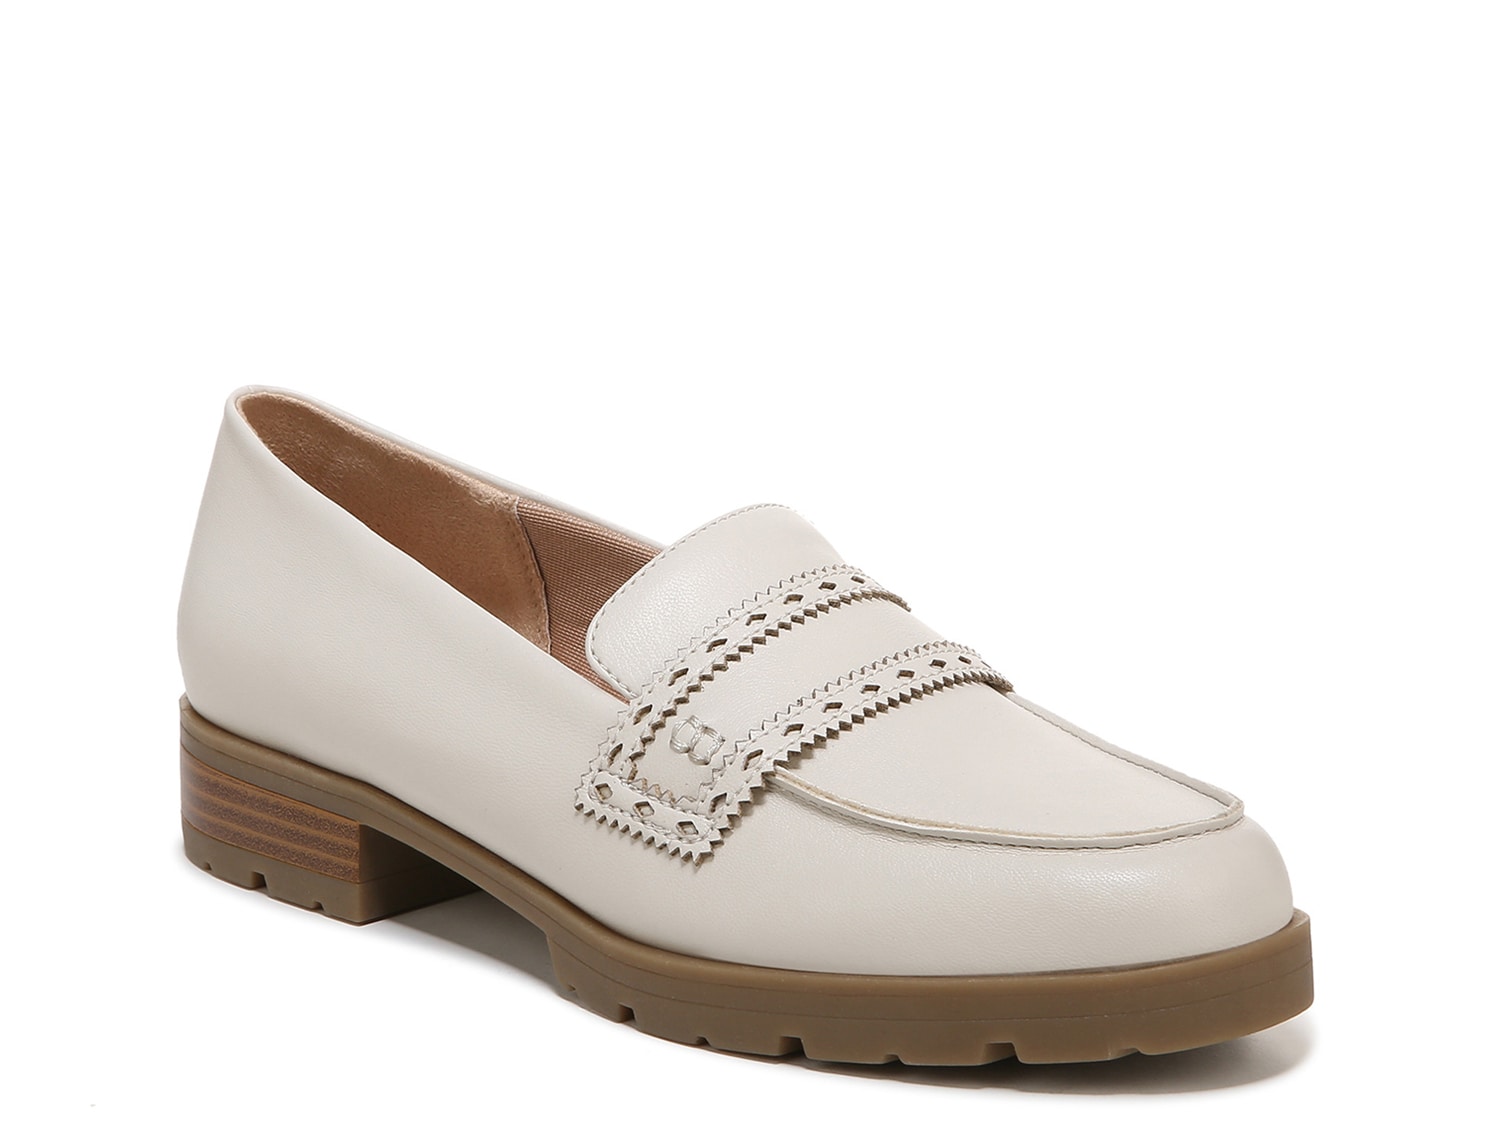 LifeStride London Penny Loafer - Free Shipping | DSW